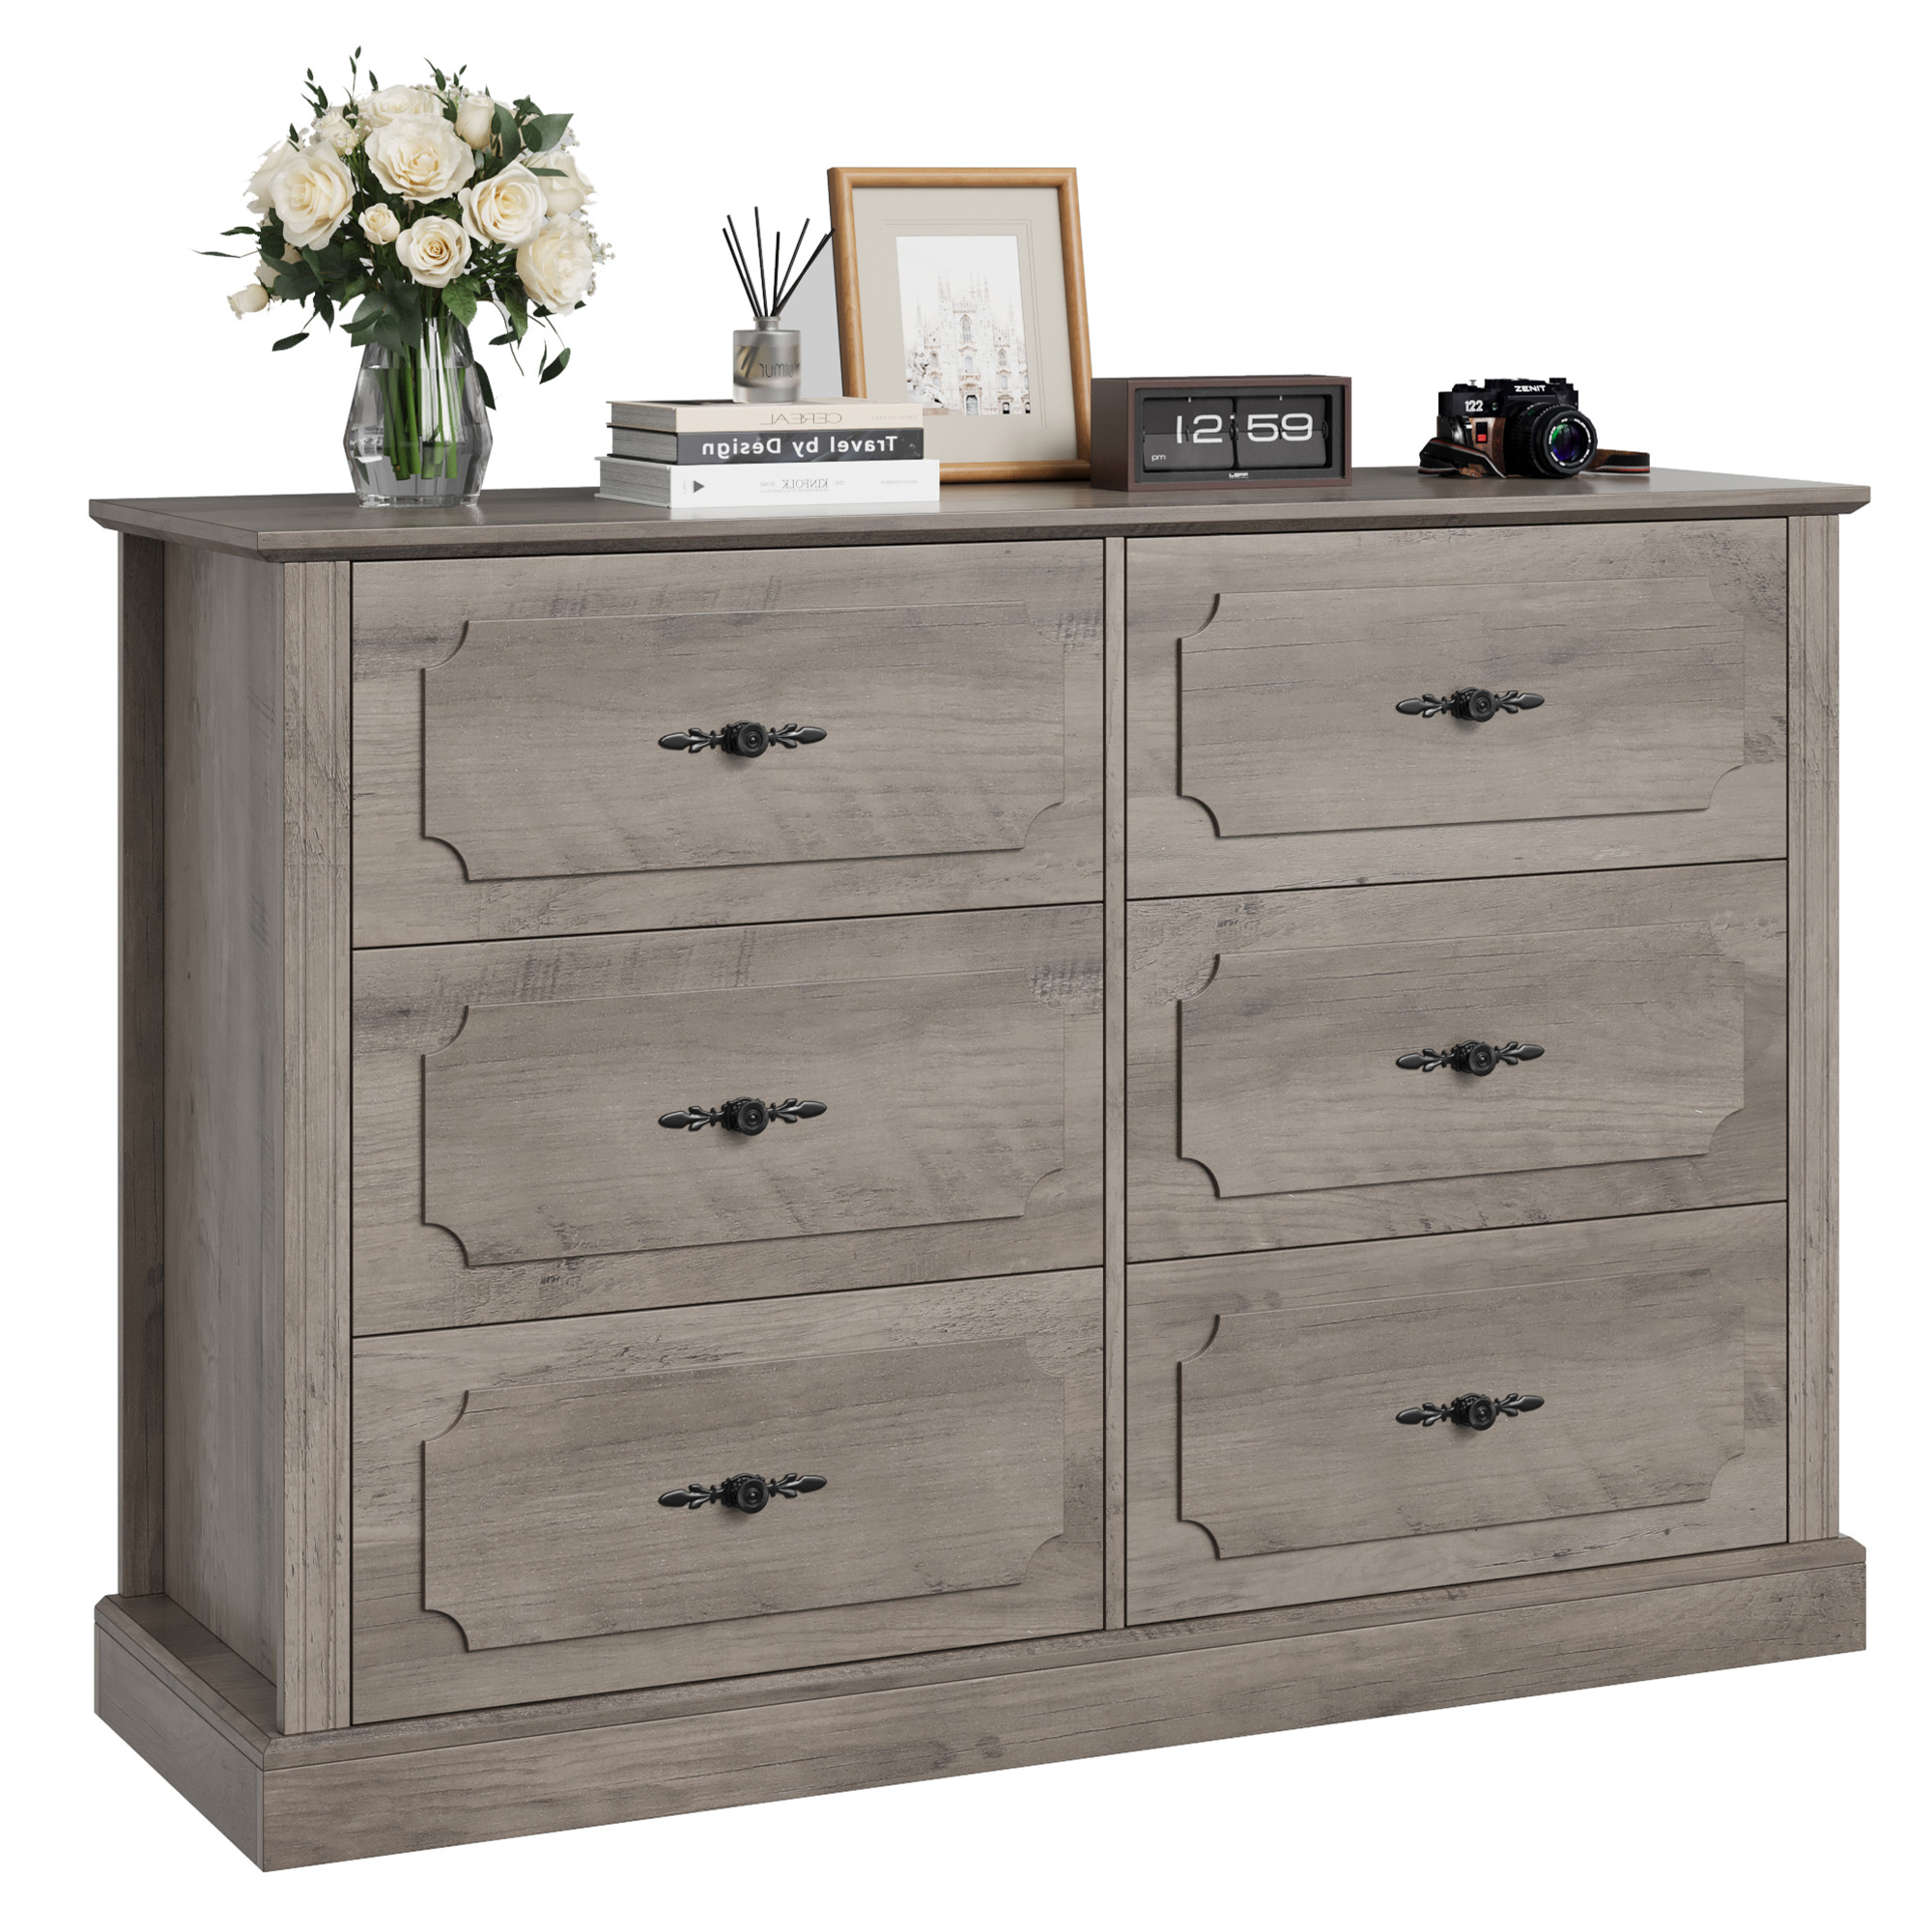 Homfa 6 Drawer Double Bedroom Dresser, Vintage Wood Storage Cabinet Large Drawer Chest for Living Room, Easy to Clean Top, Wash Gray - image 2 of 7